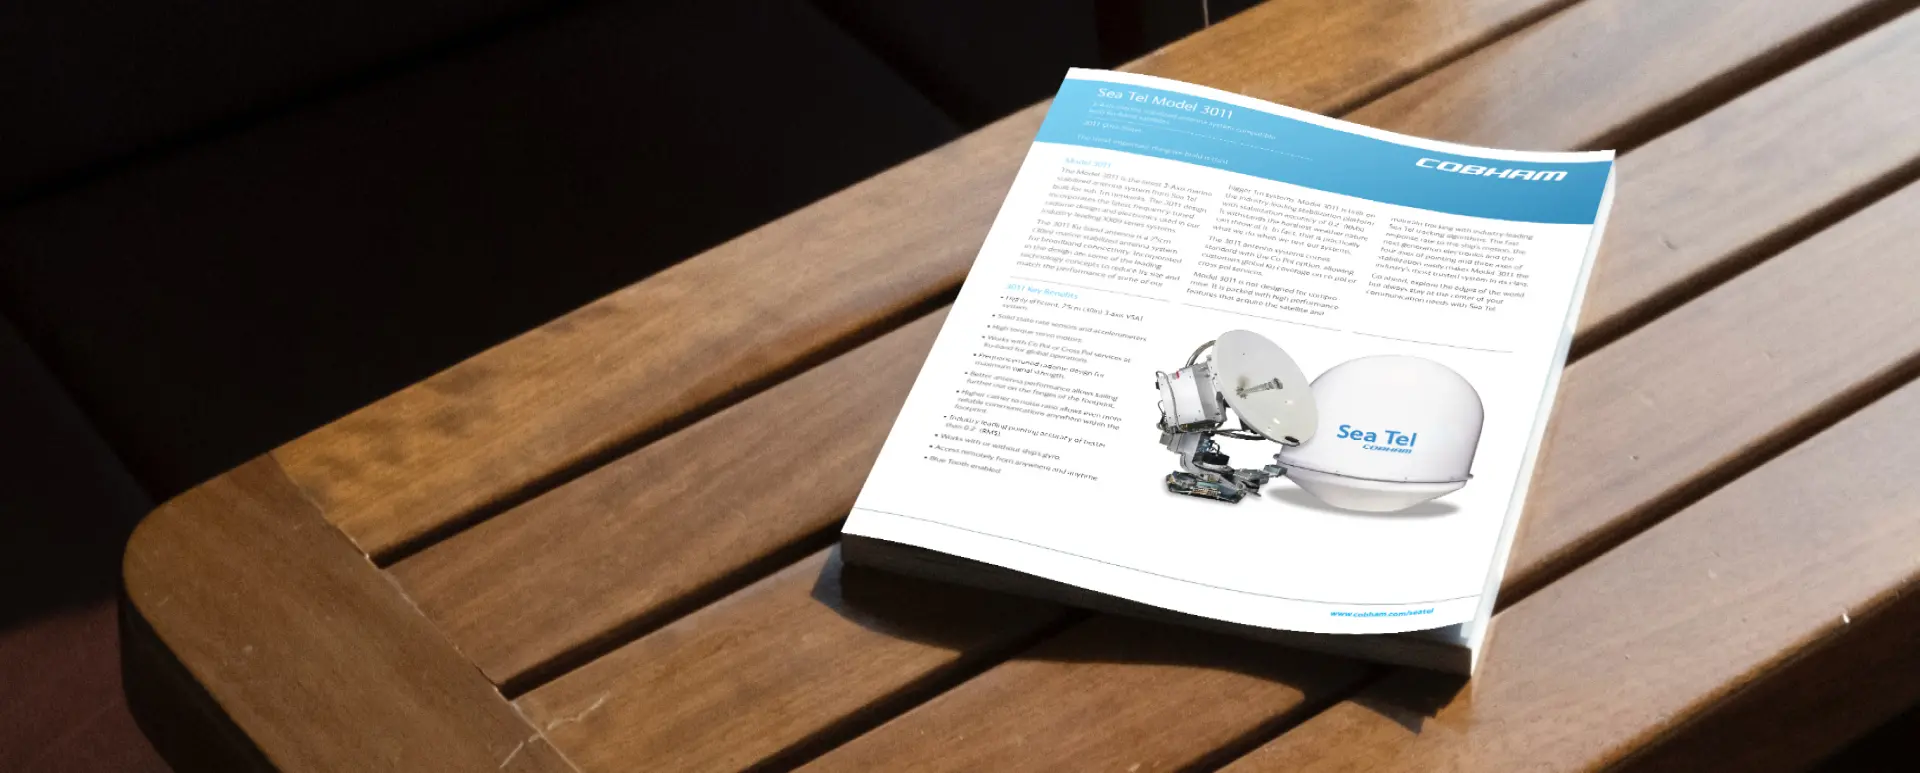 Stack of printed data sheets for Cobham 3011, 3-Axis marine stabilized antenna system.